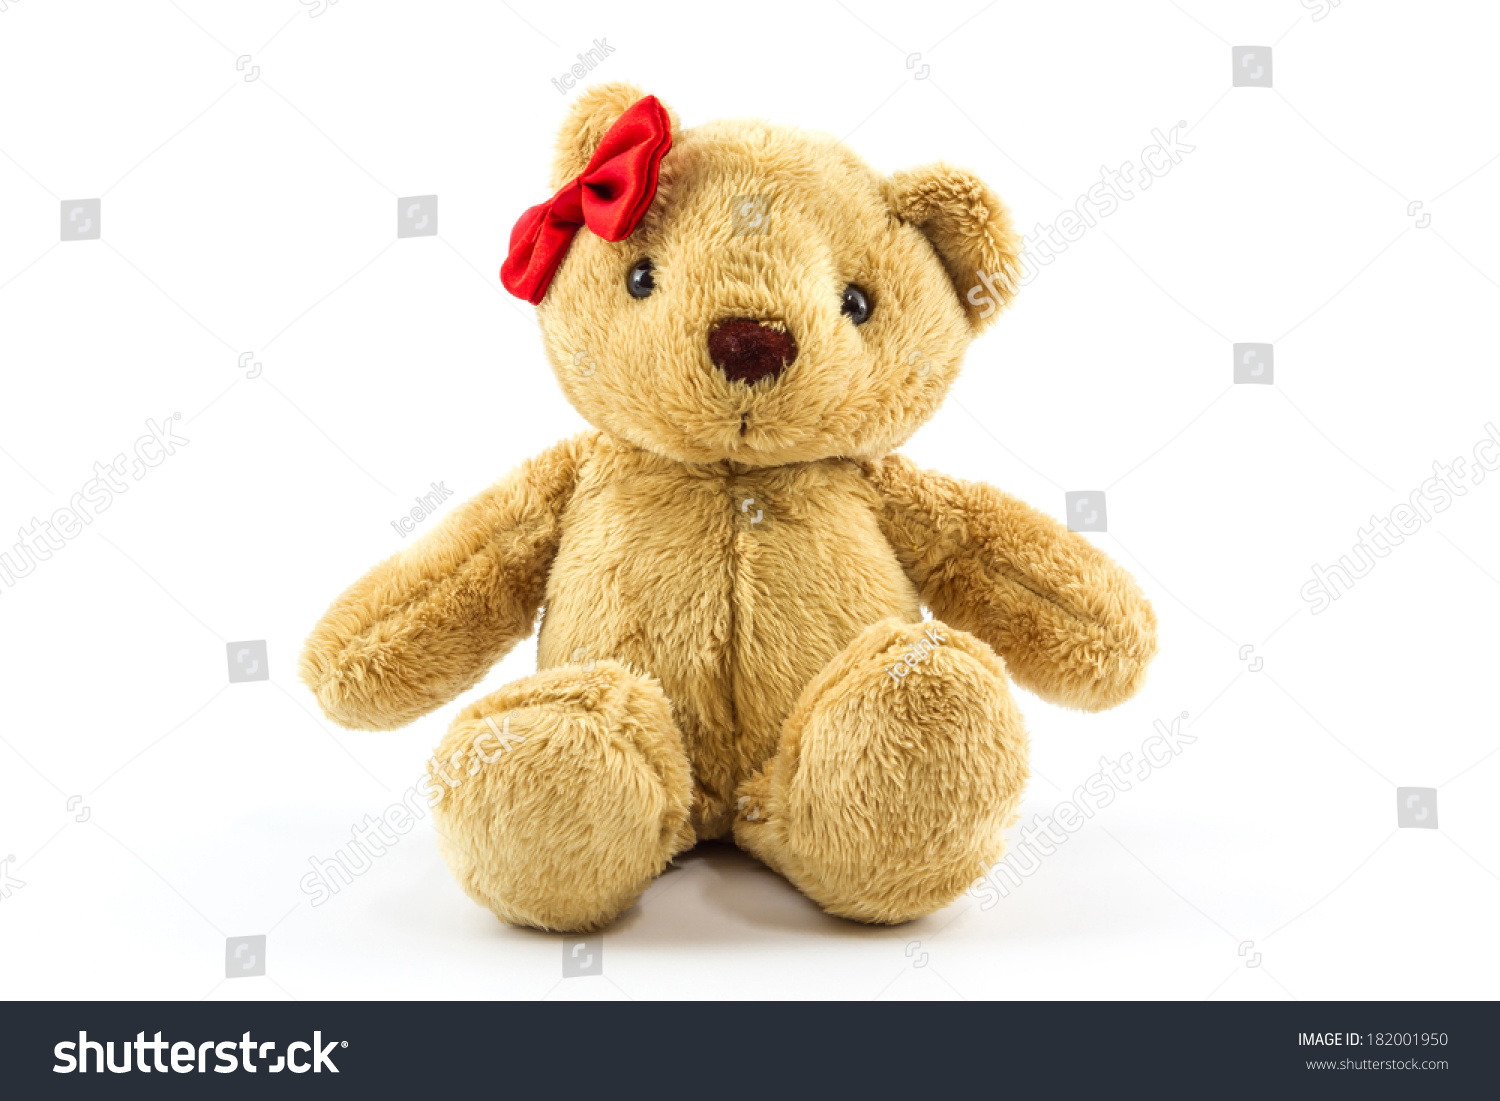 teddy bear with red bow